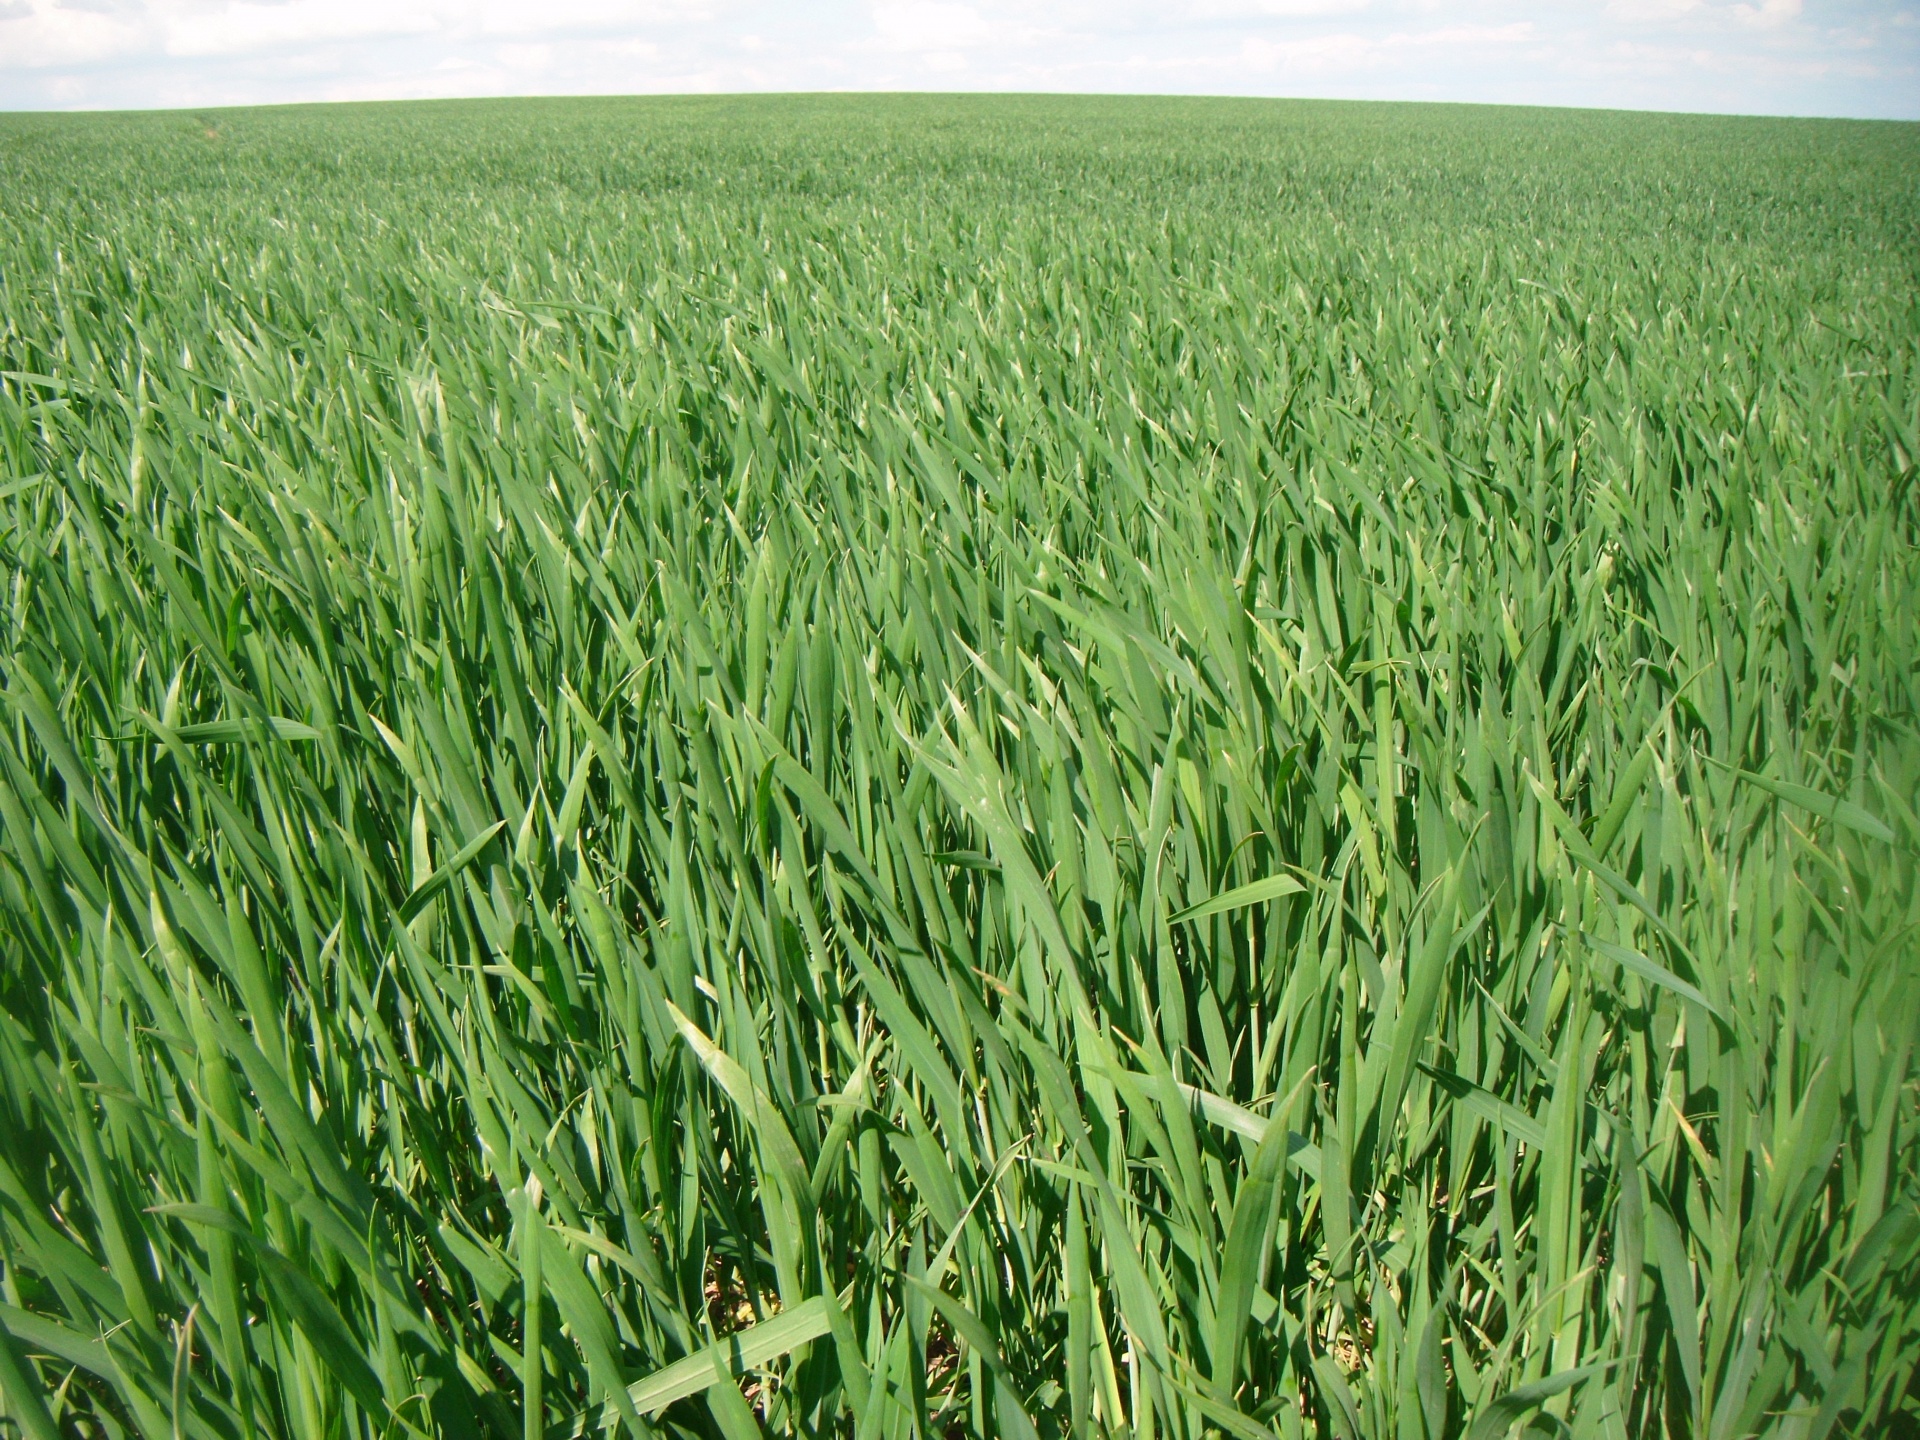 Field full of young green wheat